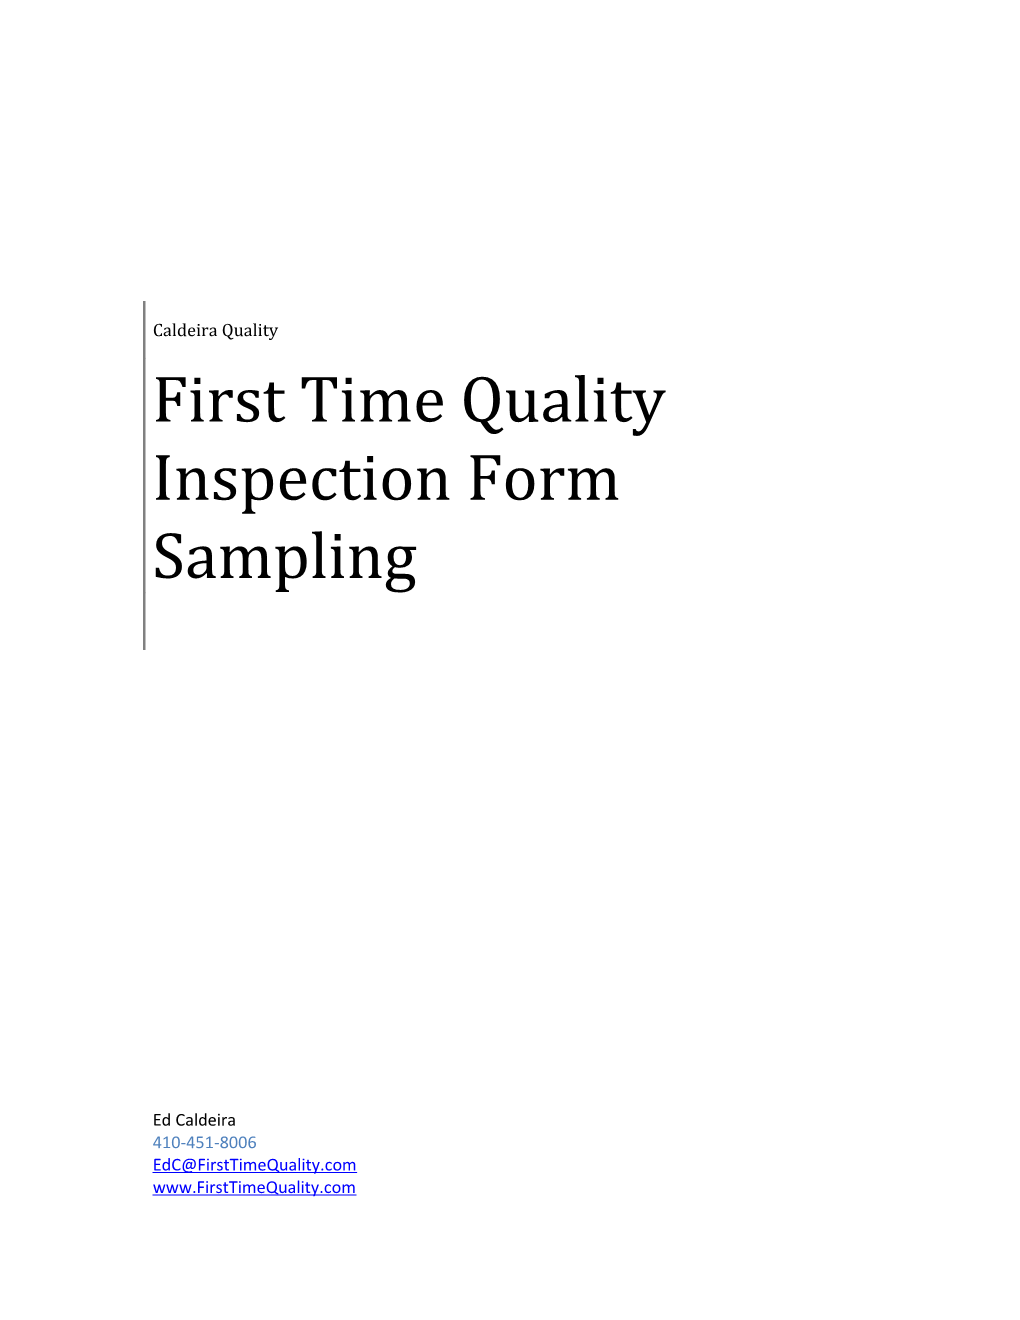 First Time Quality Inspection Forms